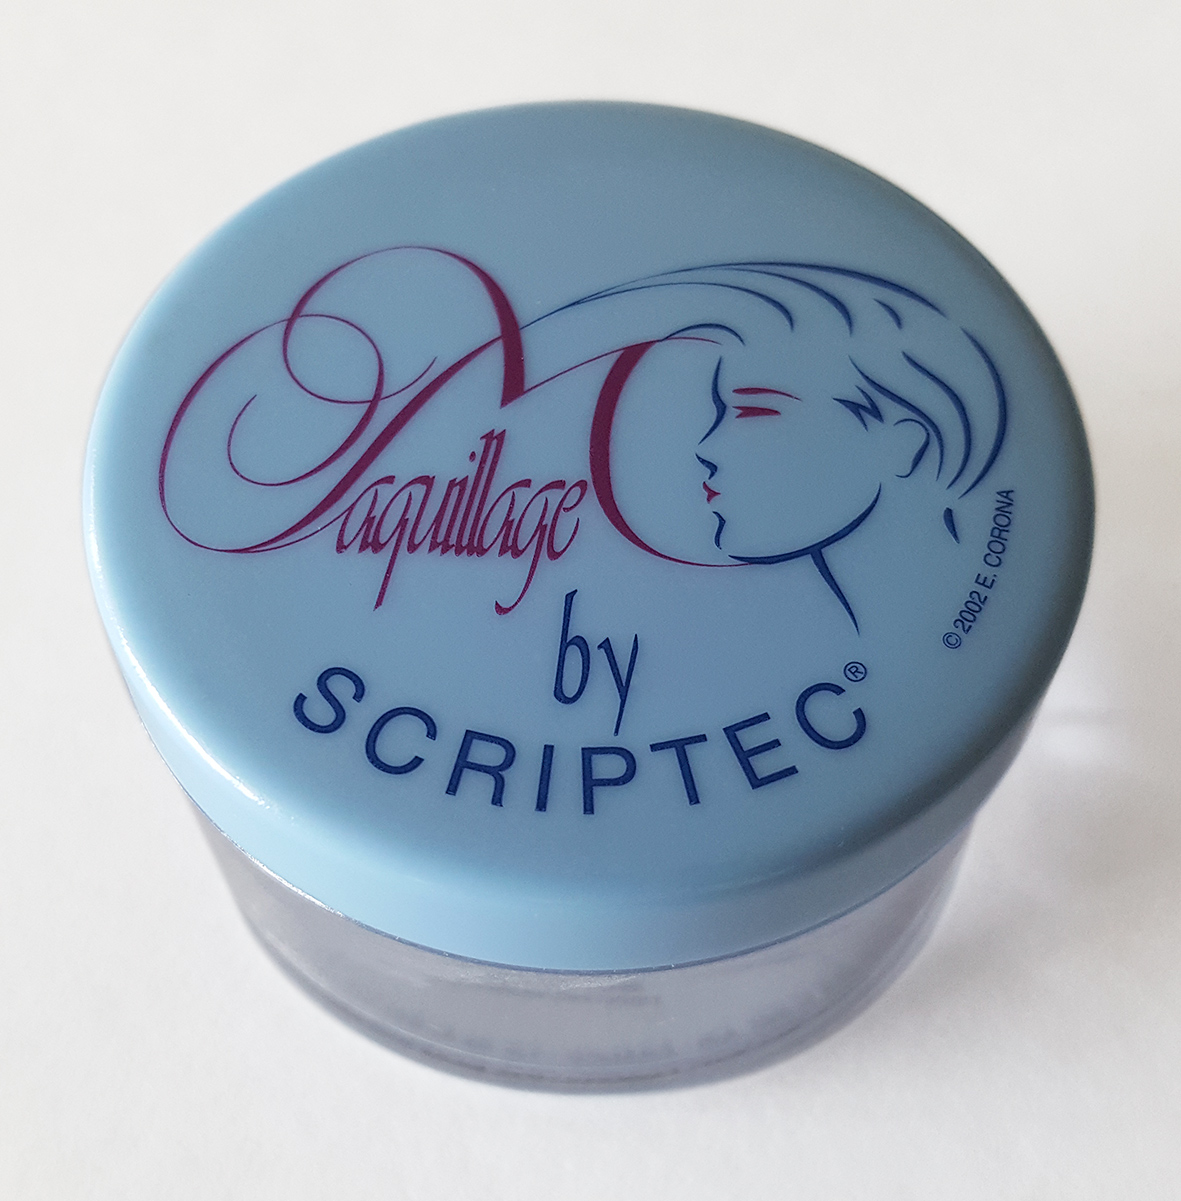 Logo Maquillage by Scriptec